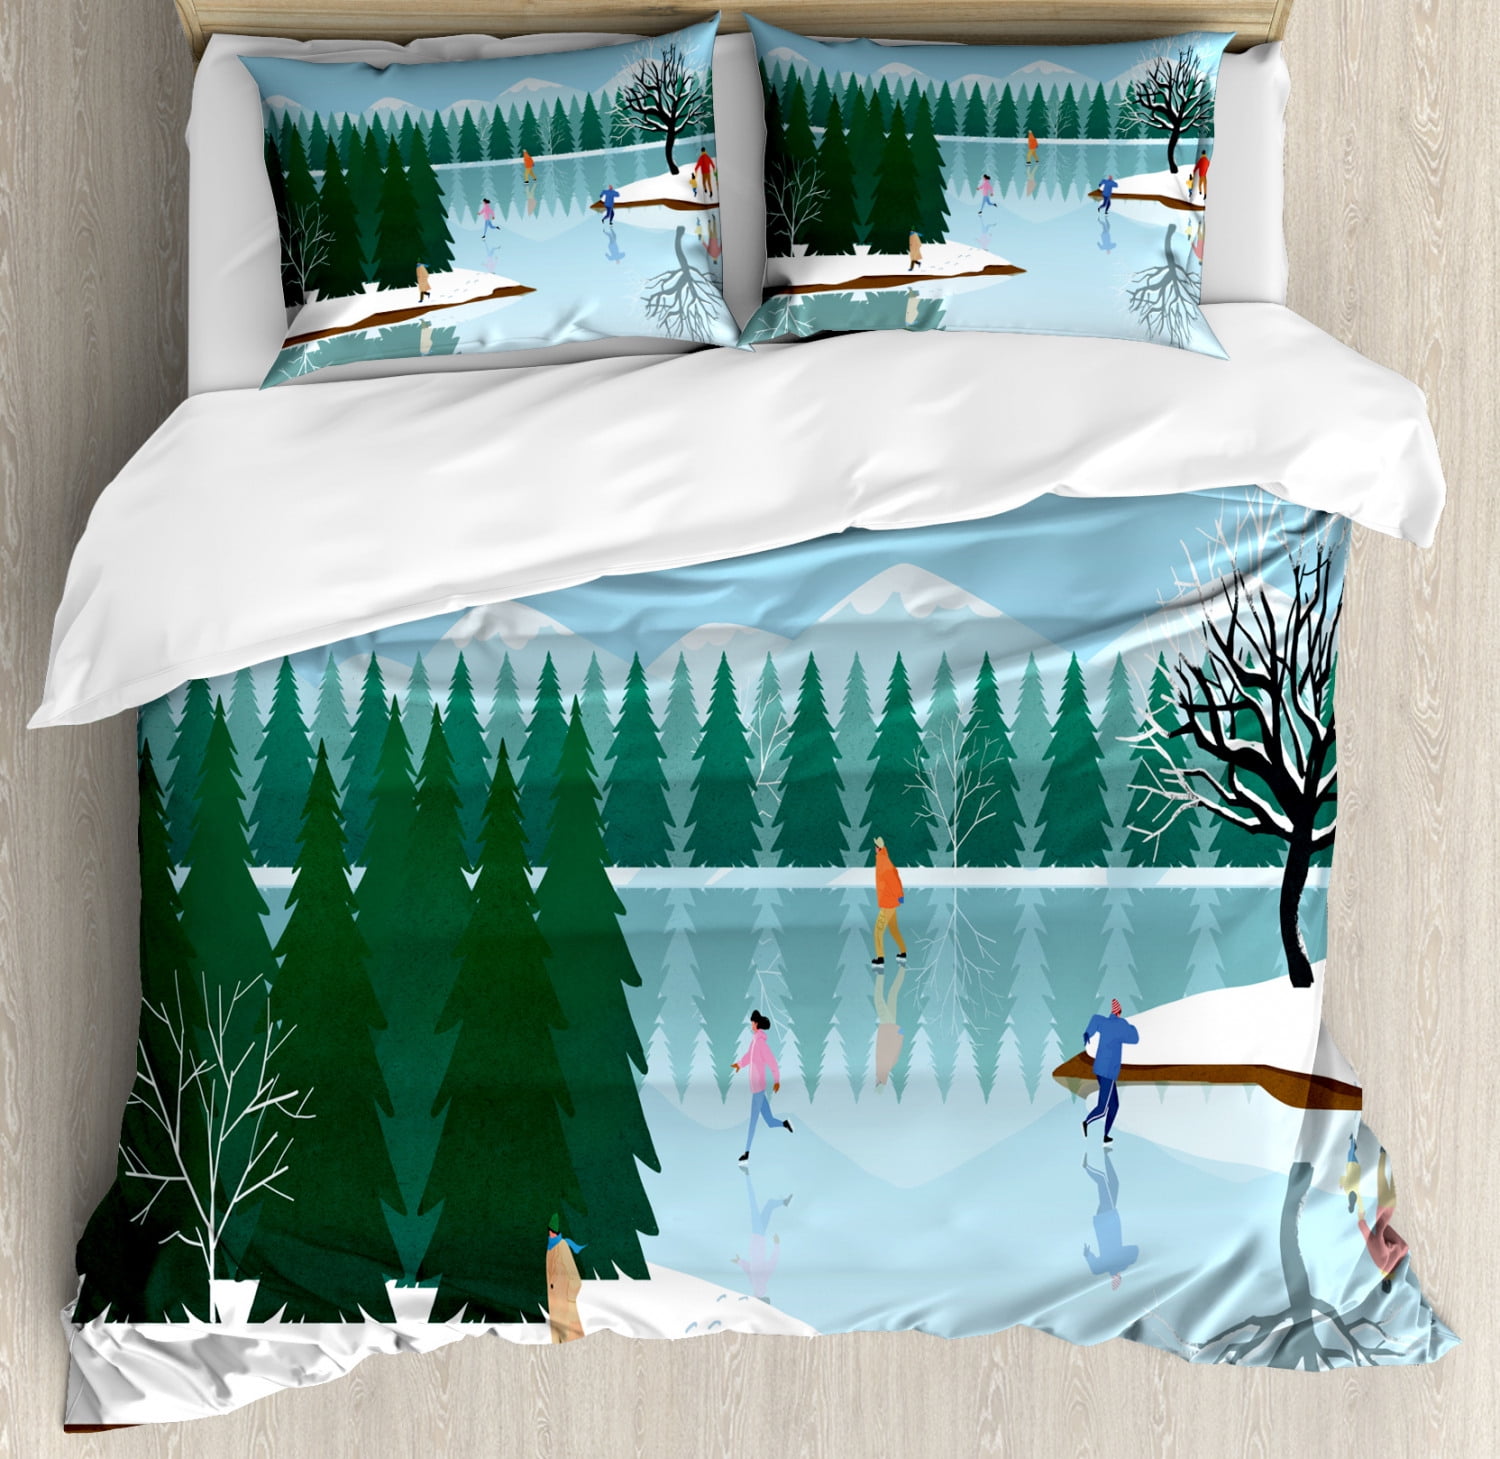 Winter Duvet Cover Set Queen Size Frozen Lake Christmas Holiday Ice Skating Illustration Urban Activity Composition 3 Piece Bedding Set With 2 Pillow Shams Multicolor By Ambesonne Walmart Com Walmart Com